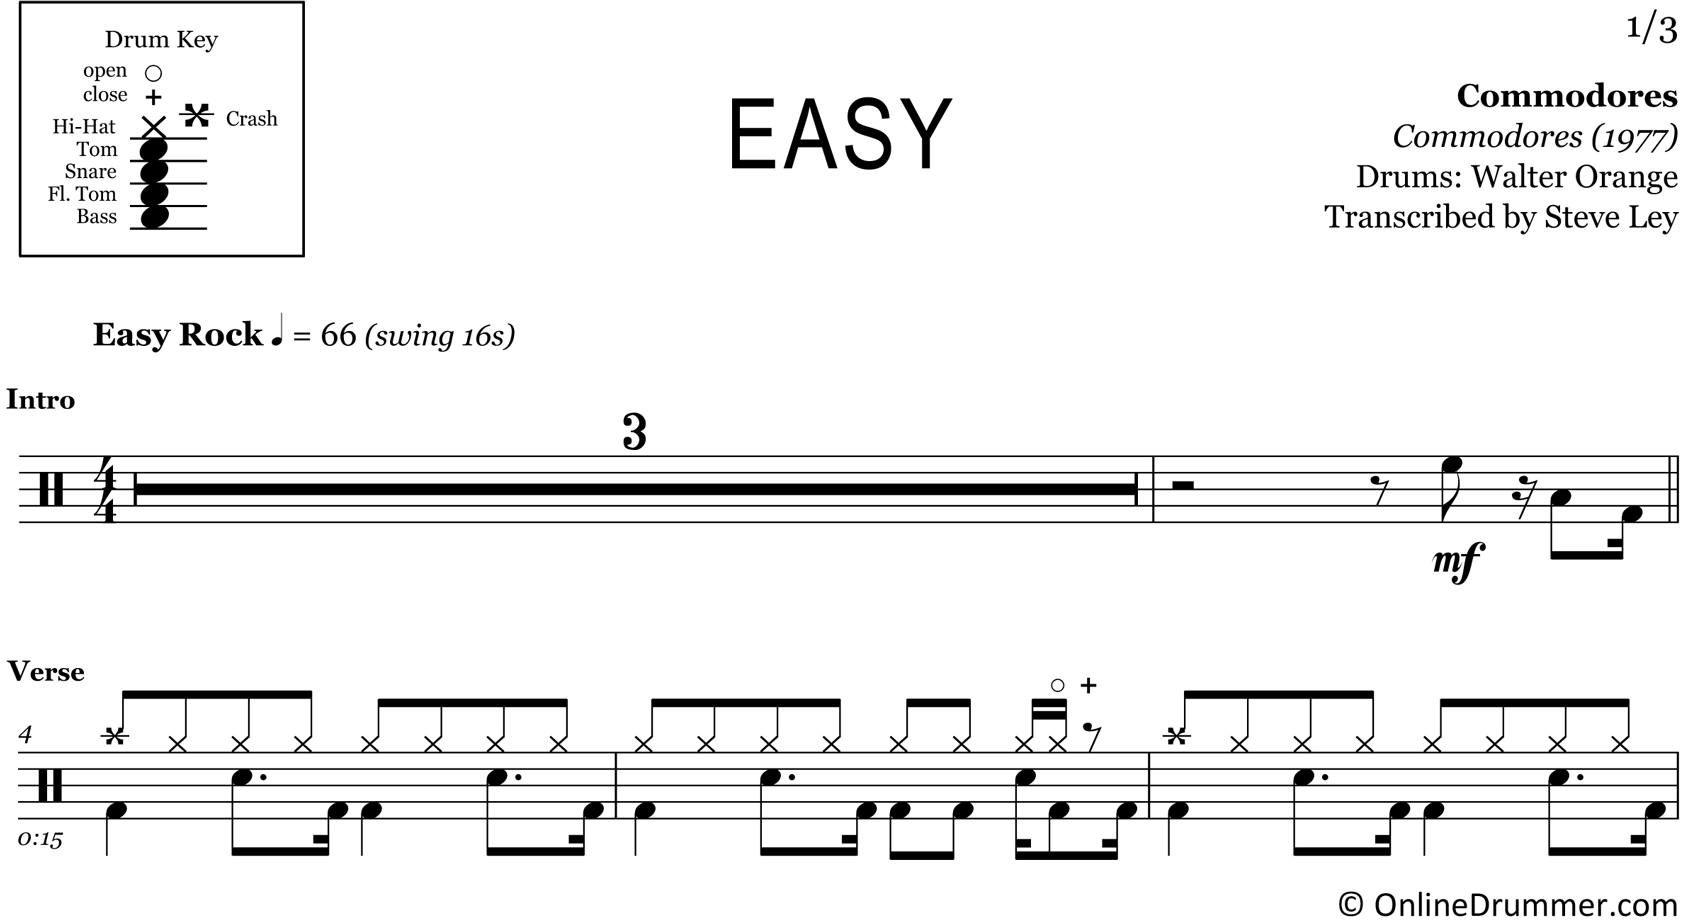 Easy - Commodores - Drum Sheet Music